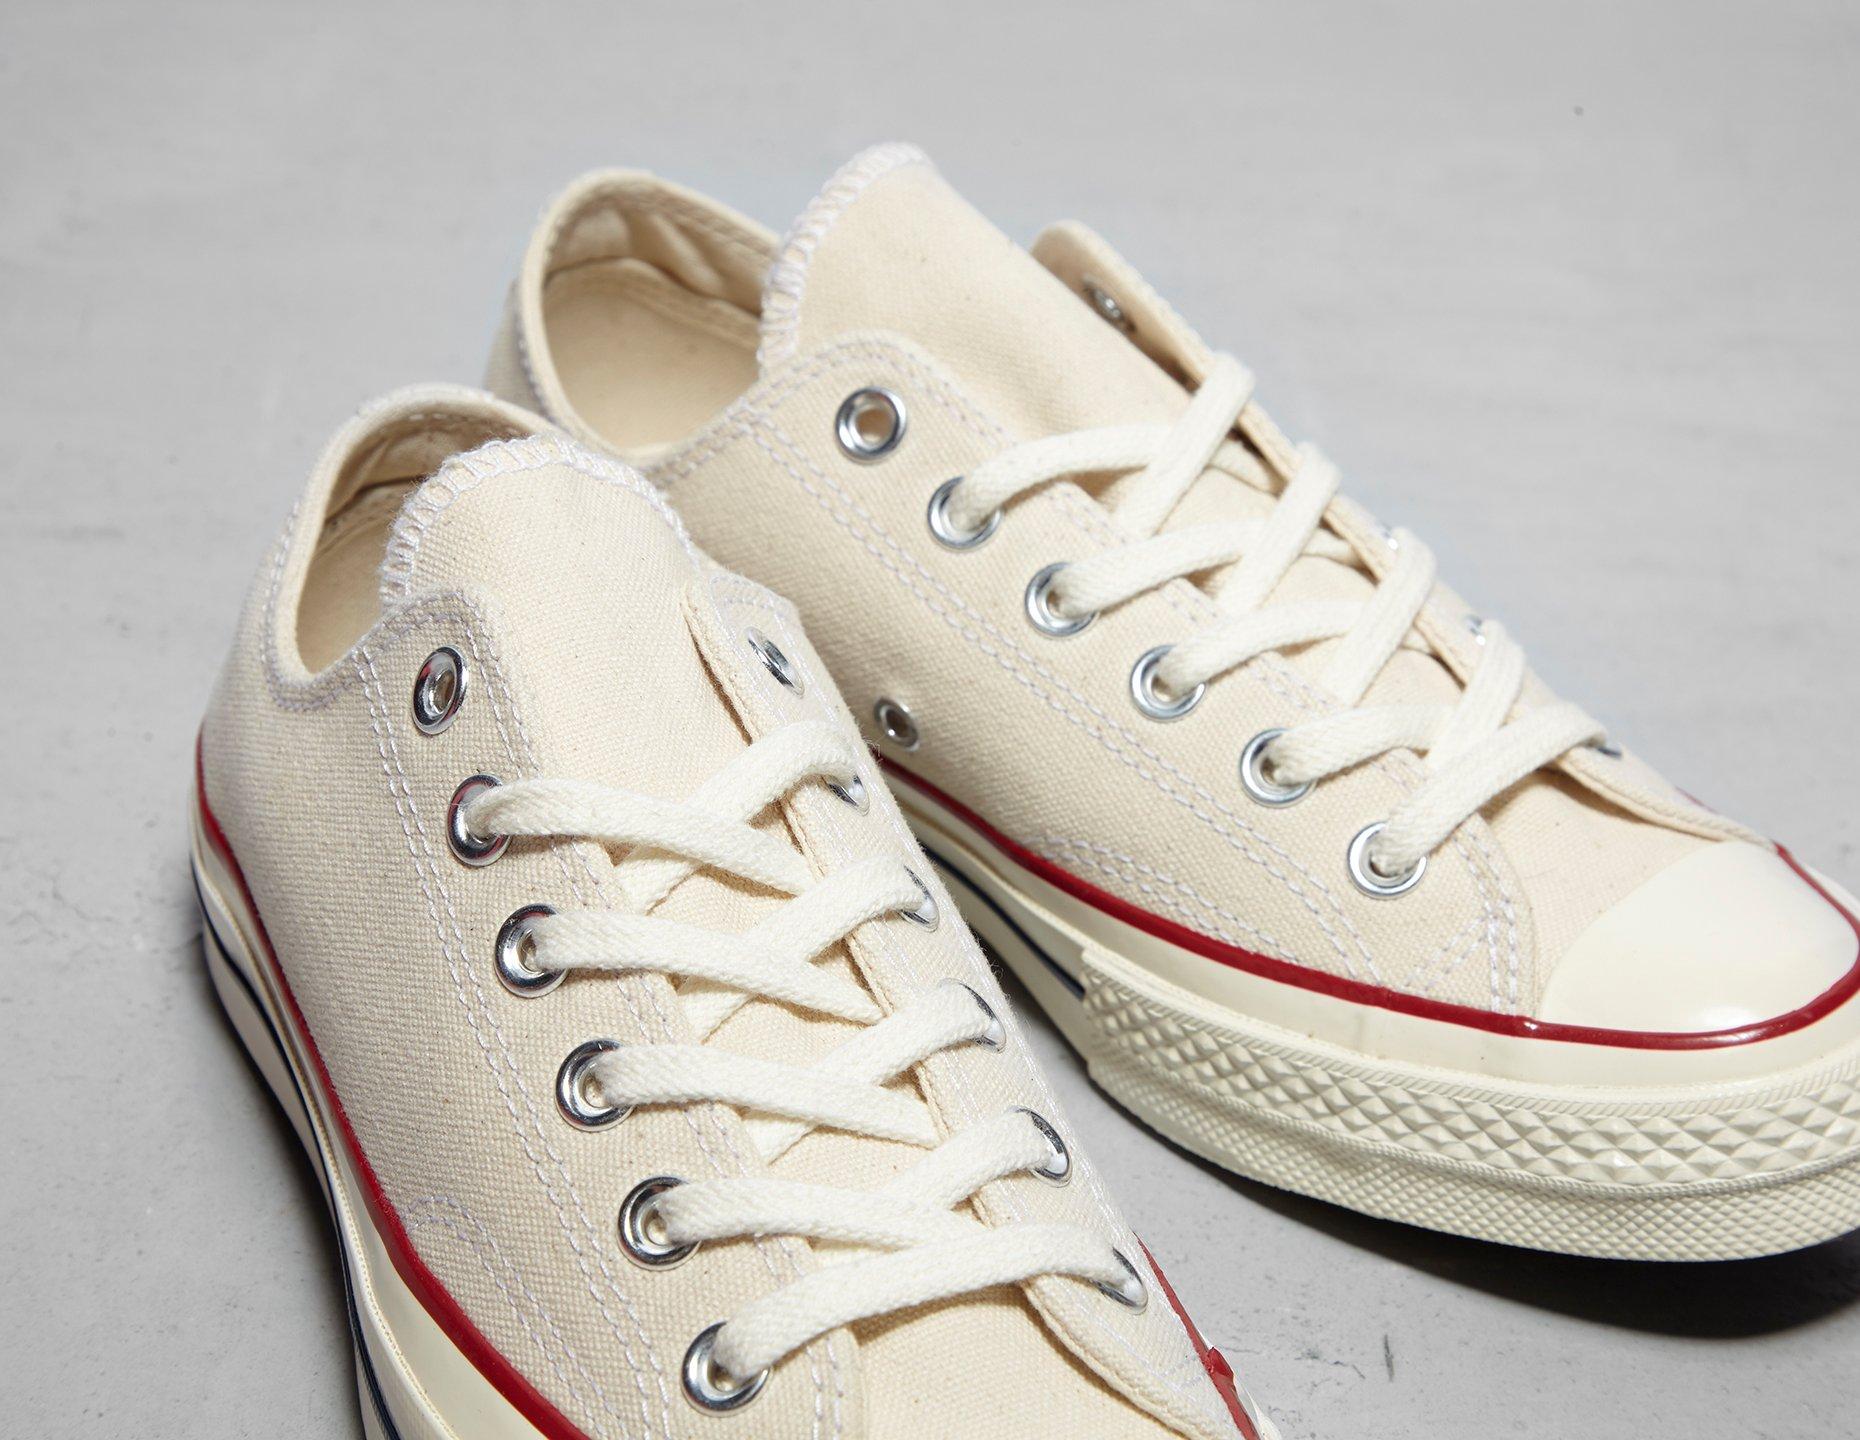 converse chuck taylor all star 70 ox shoes